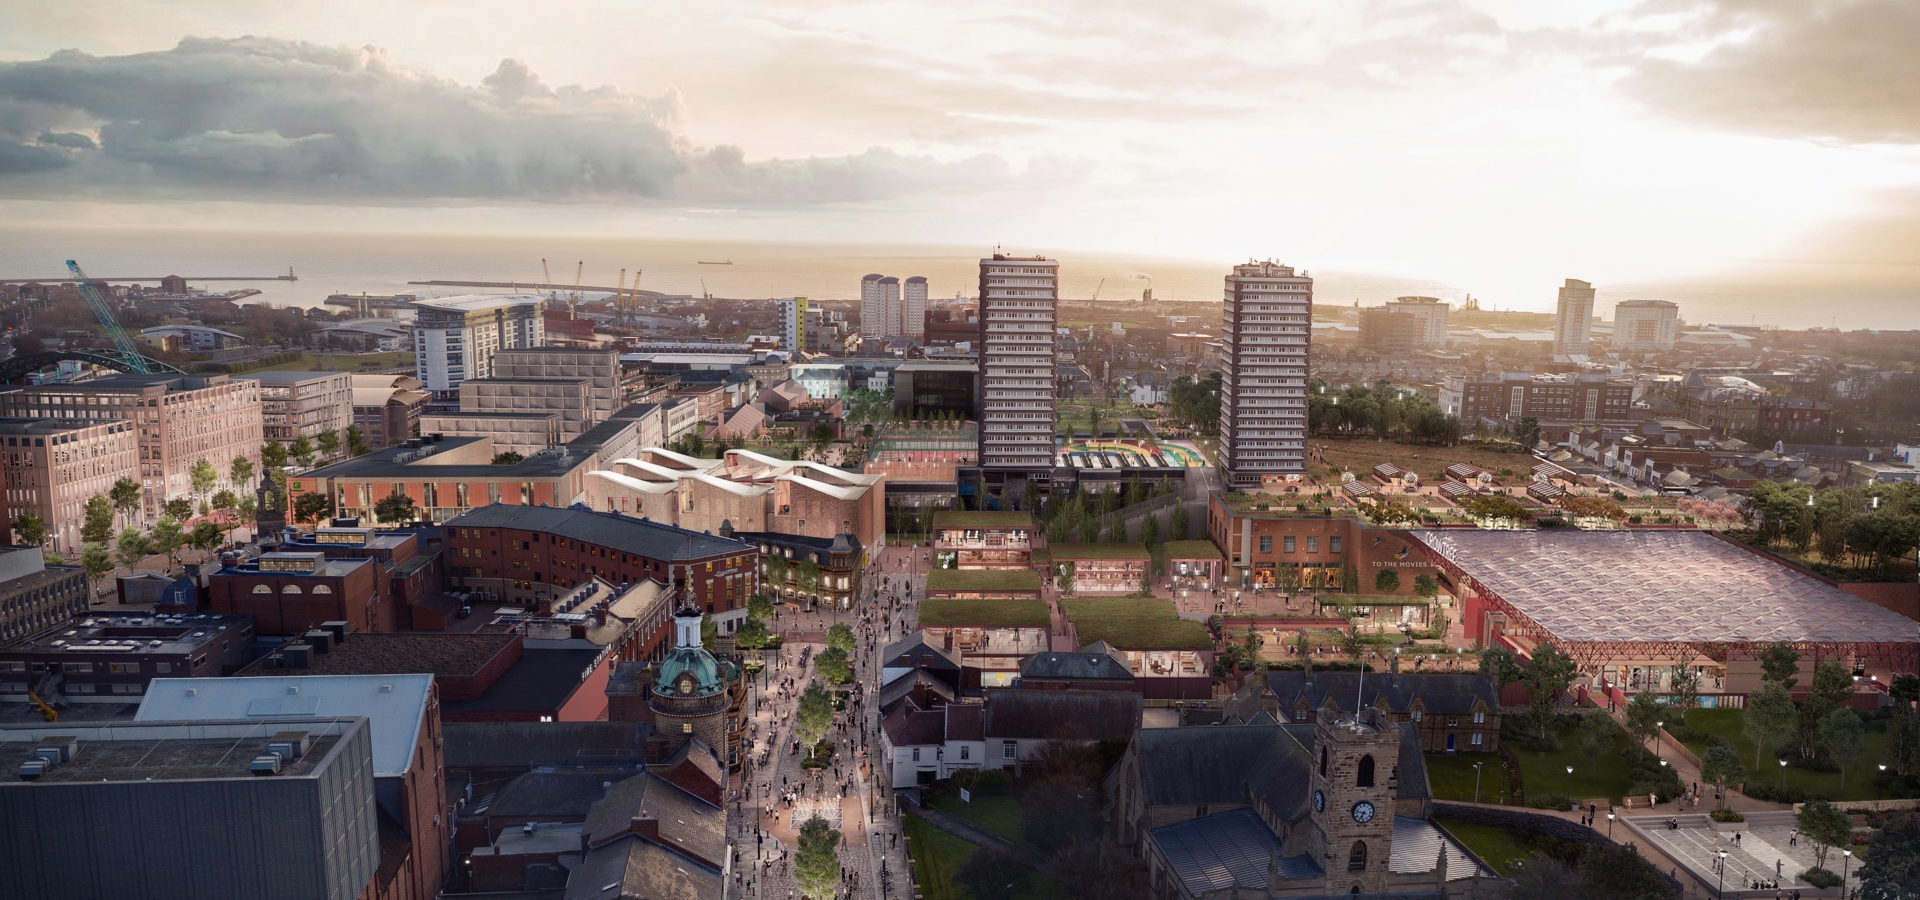 Sunderland High Street West Faulknerbrowns Architects Waf World Architecture Festival Future Project Winner Hh